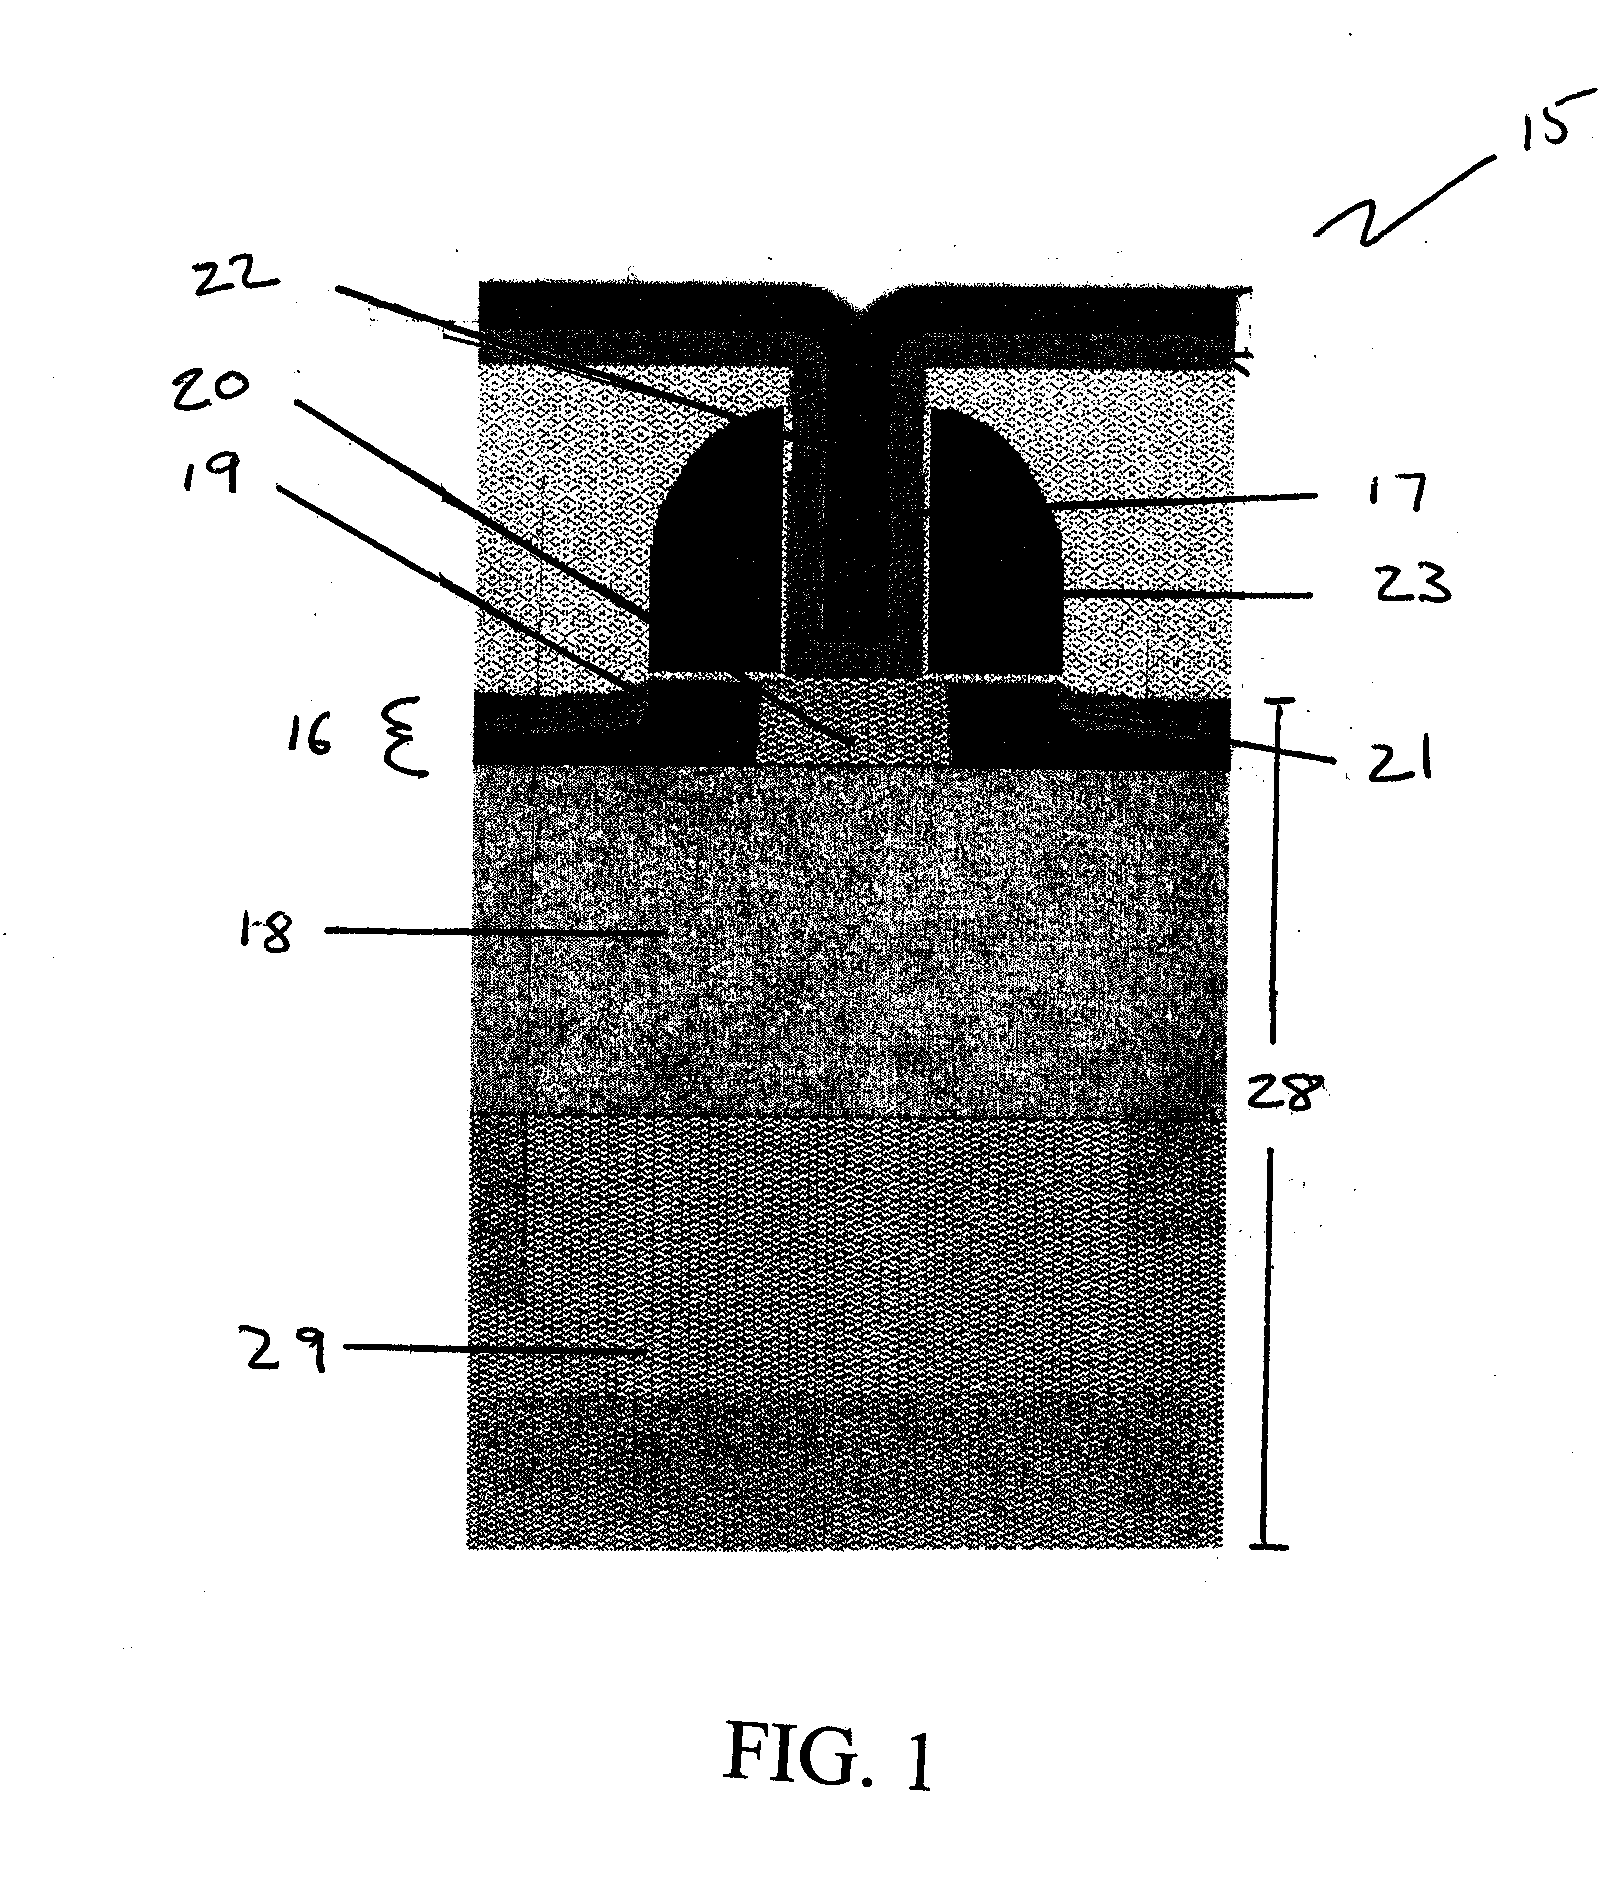 Phase Change Memory Cell On Silicon-On Insulator Substrate